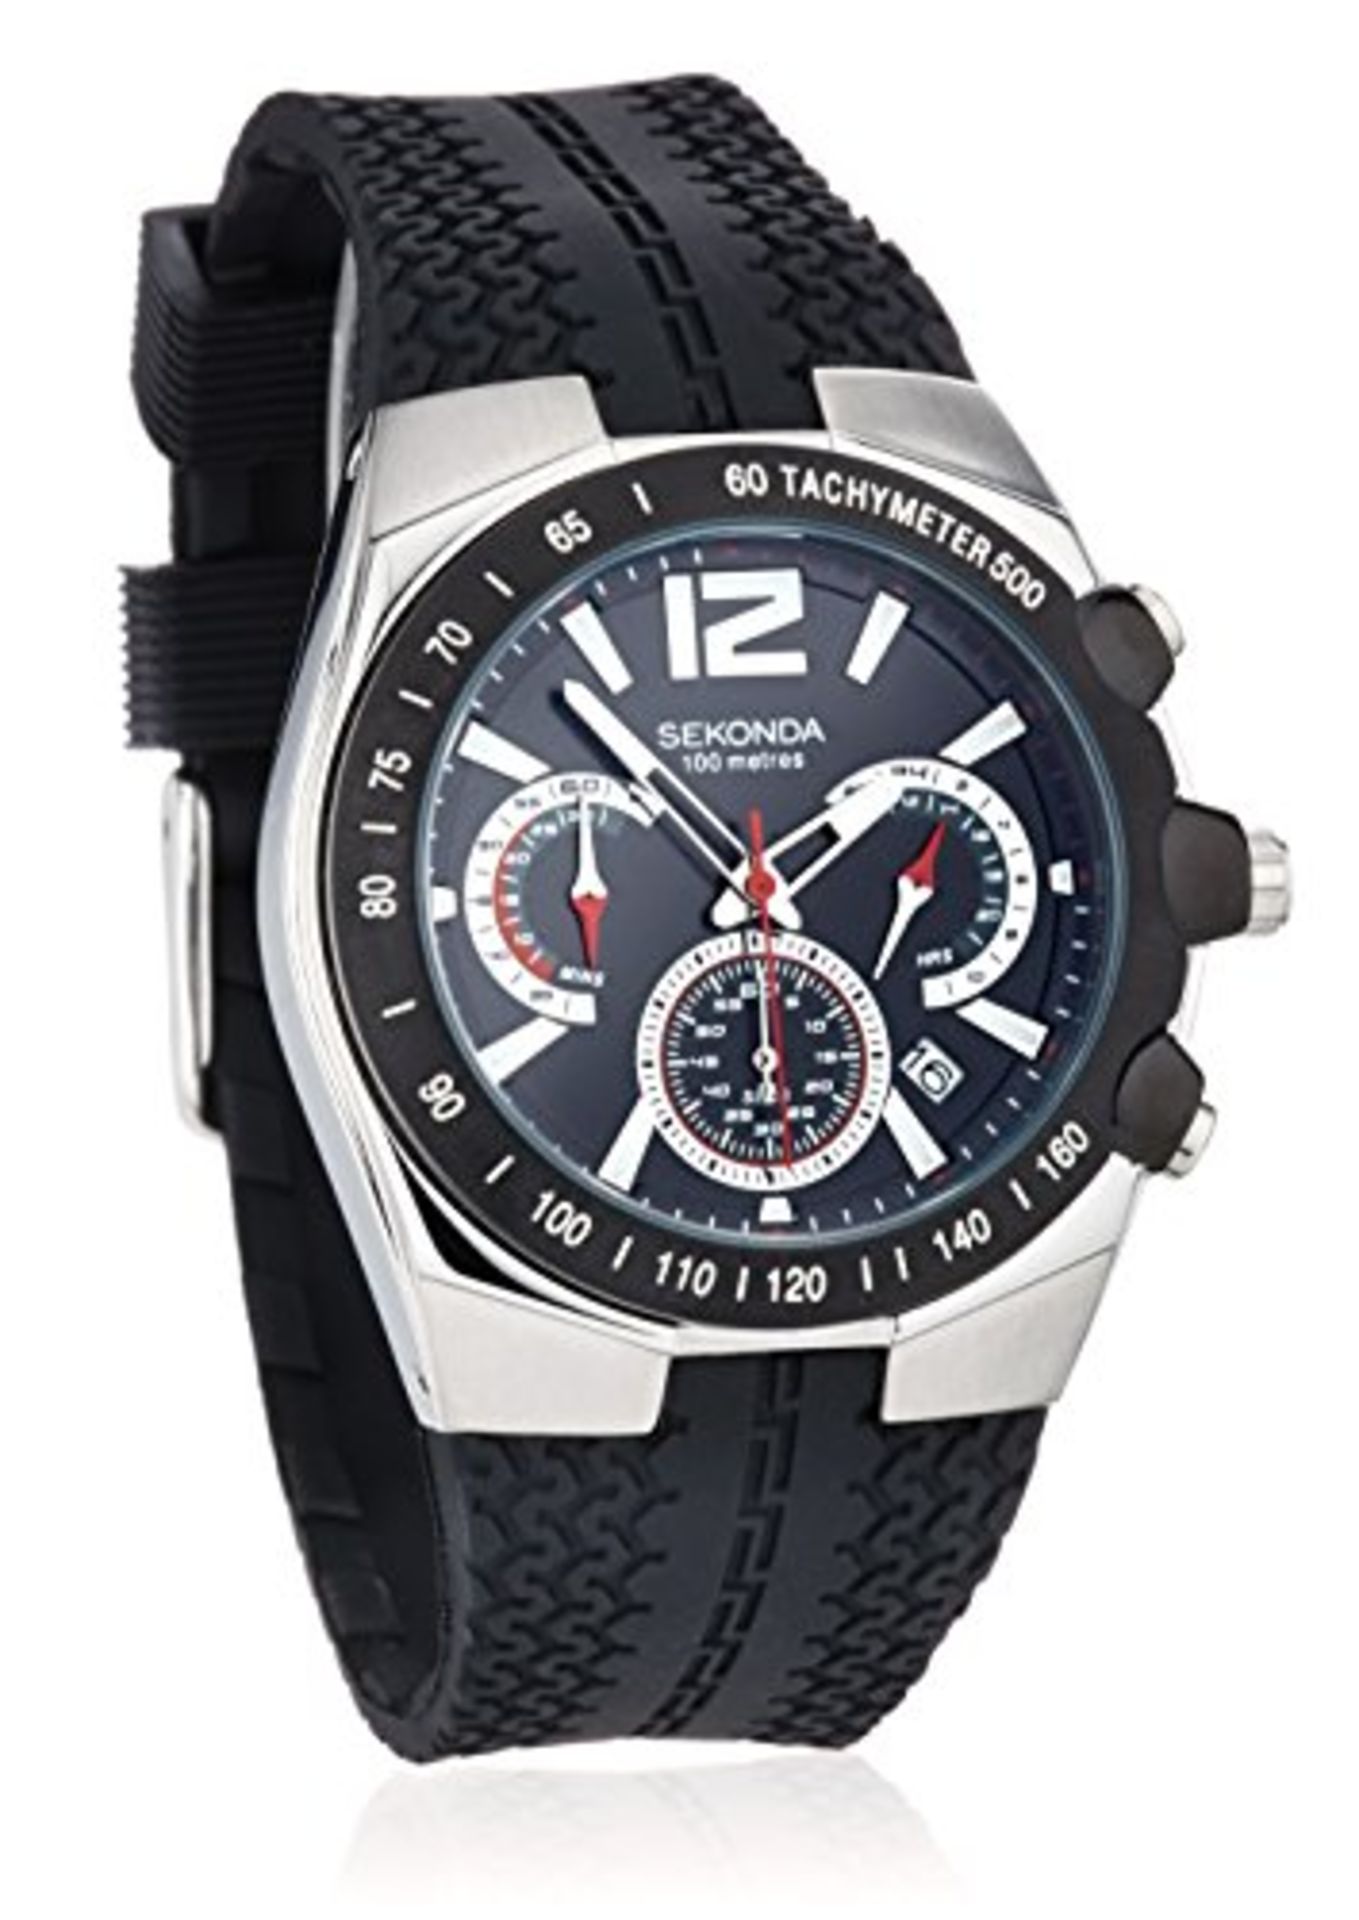 V Brand New Gents Sekonda Chronograph Tachymeter 500 with Rubber Strap - ISP £89.99 (The watch